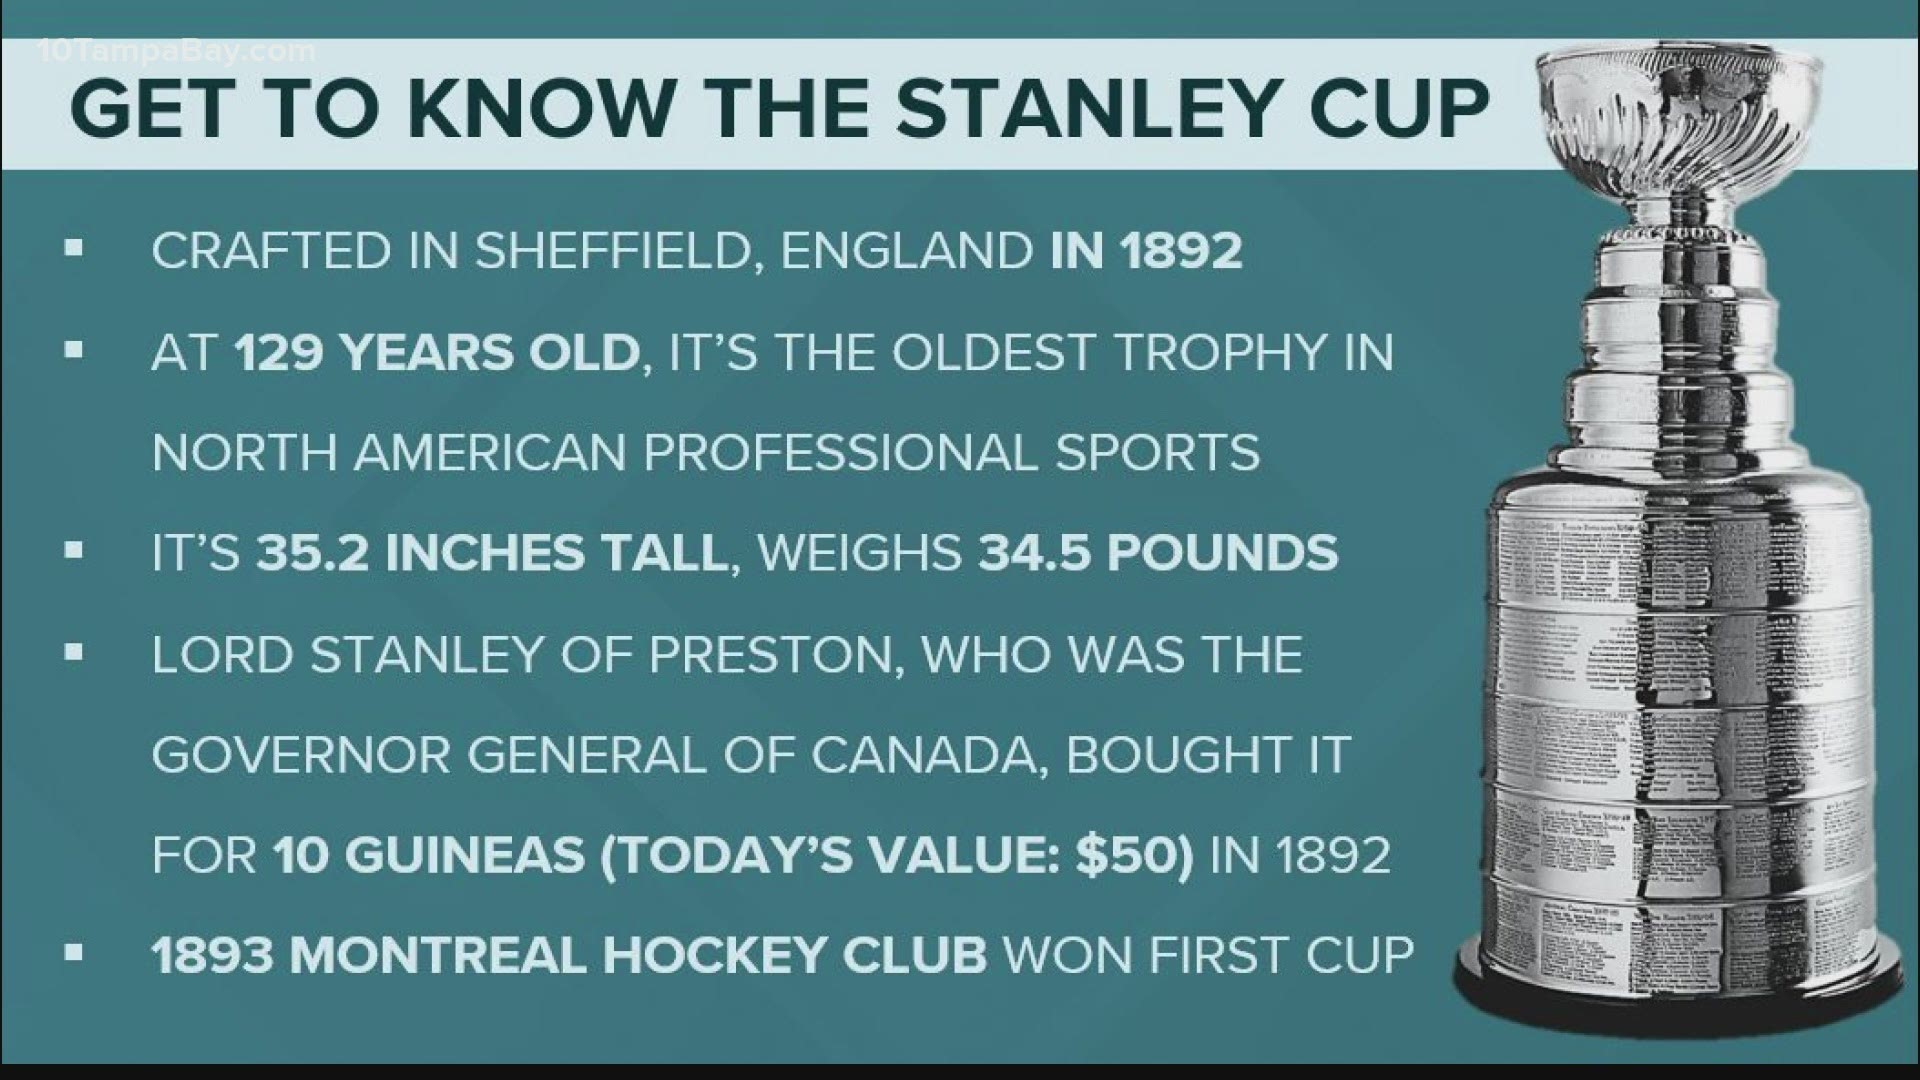 How The Stanley Cup Became So Popular